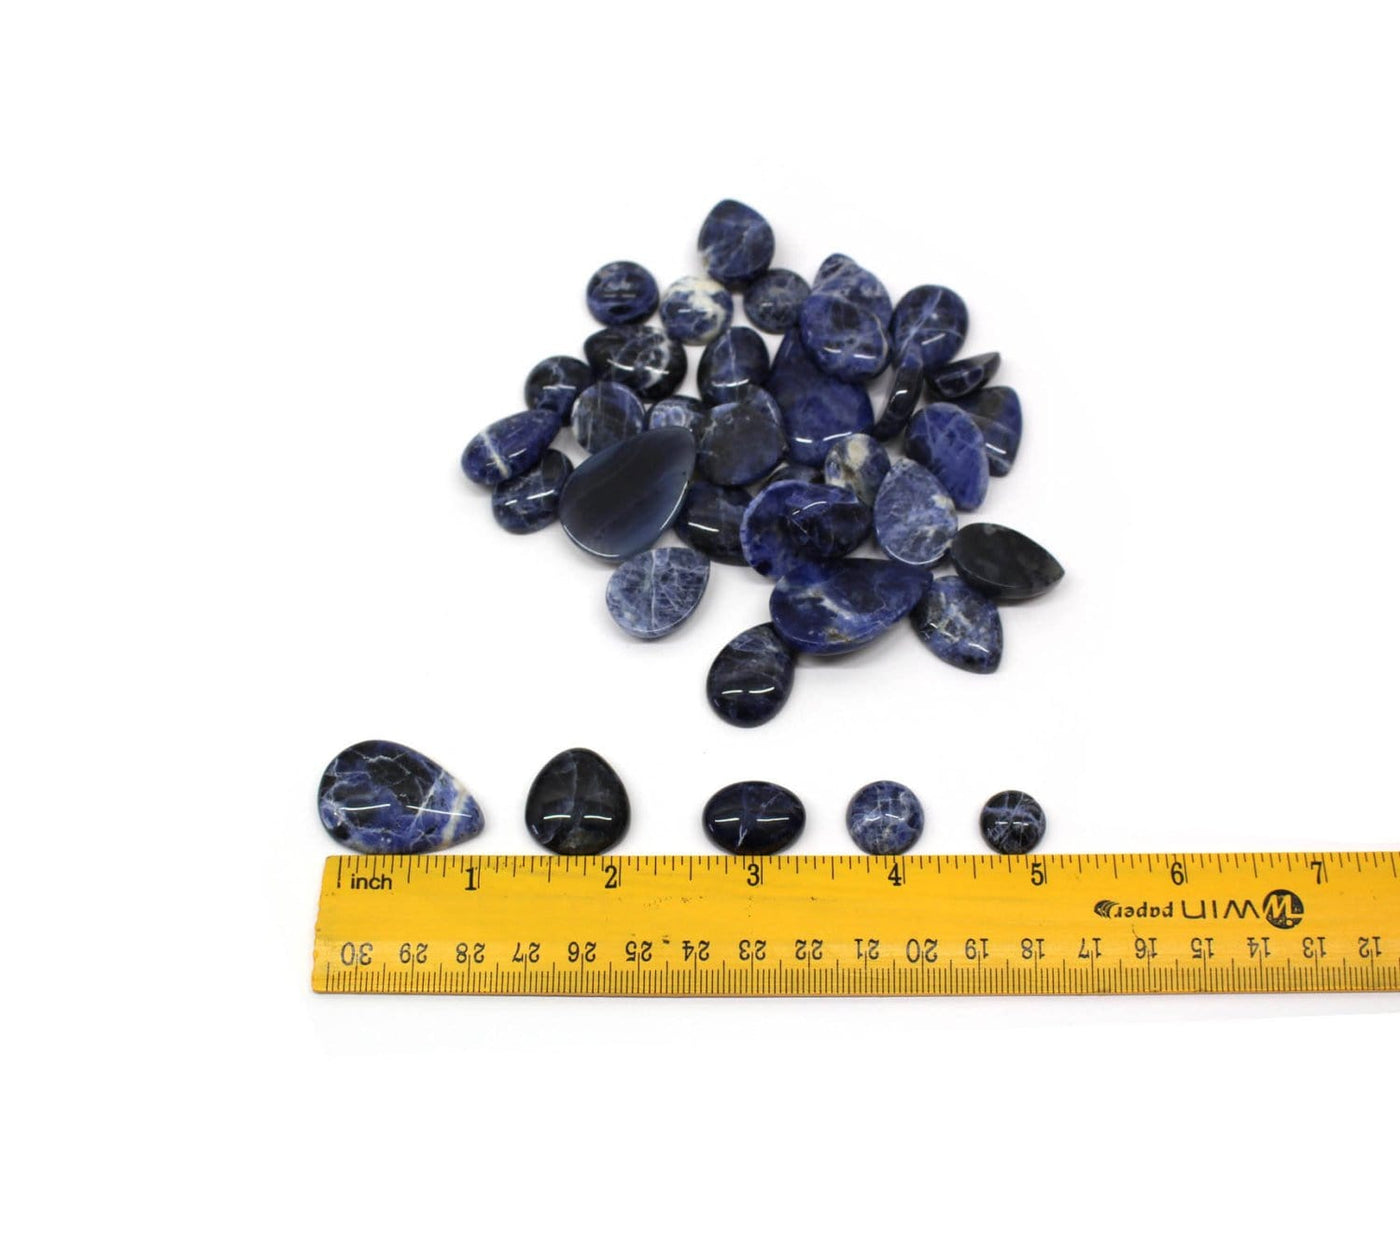 1/4 pound of blue sodalite mixed shapes cabochons next to a ruler for size reference 